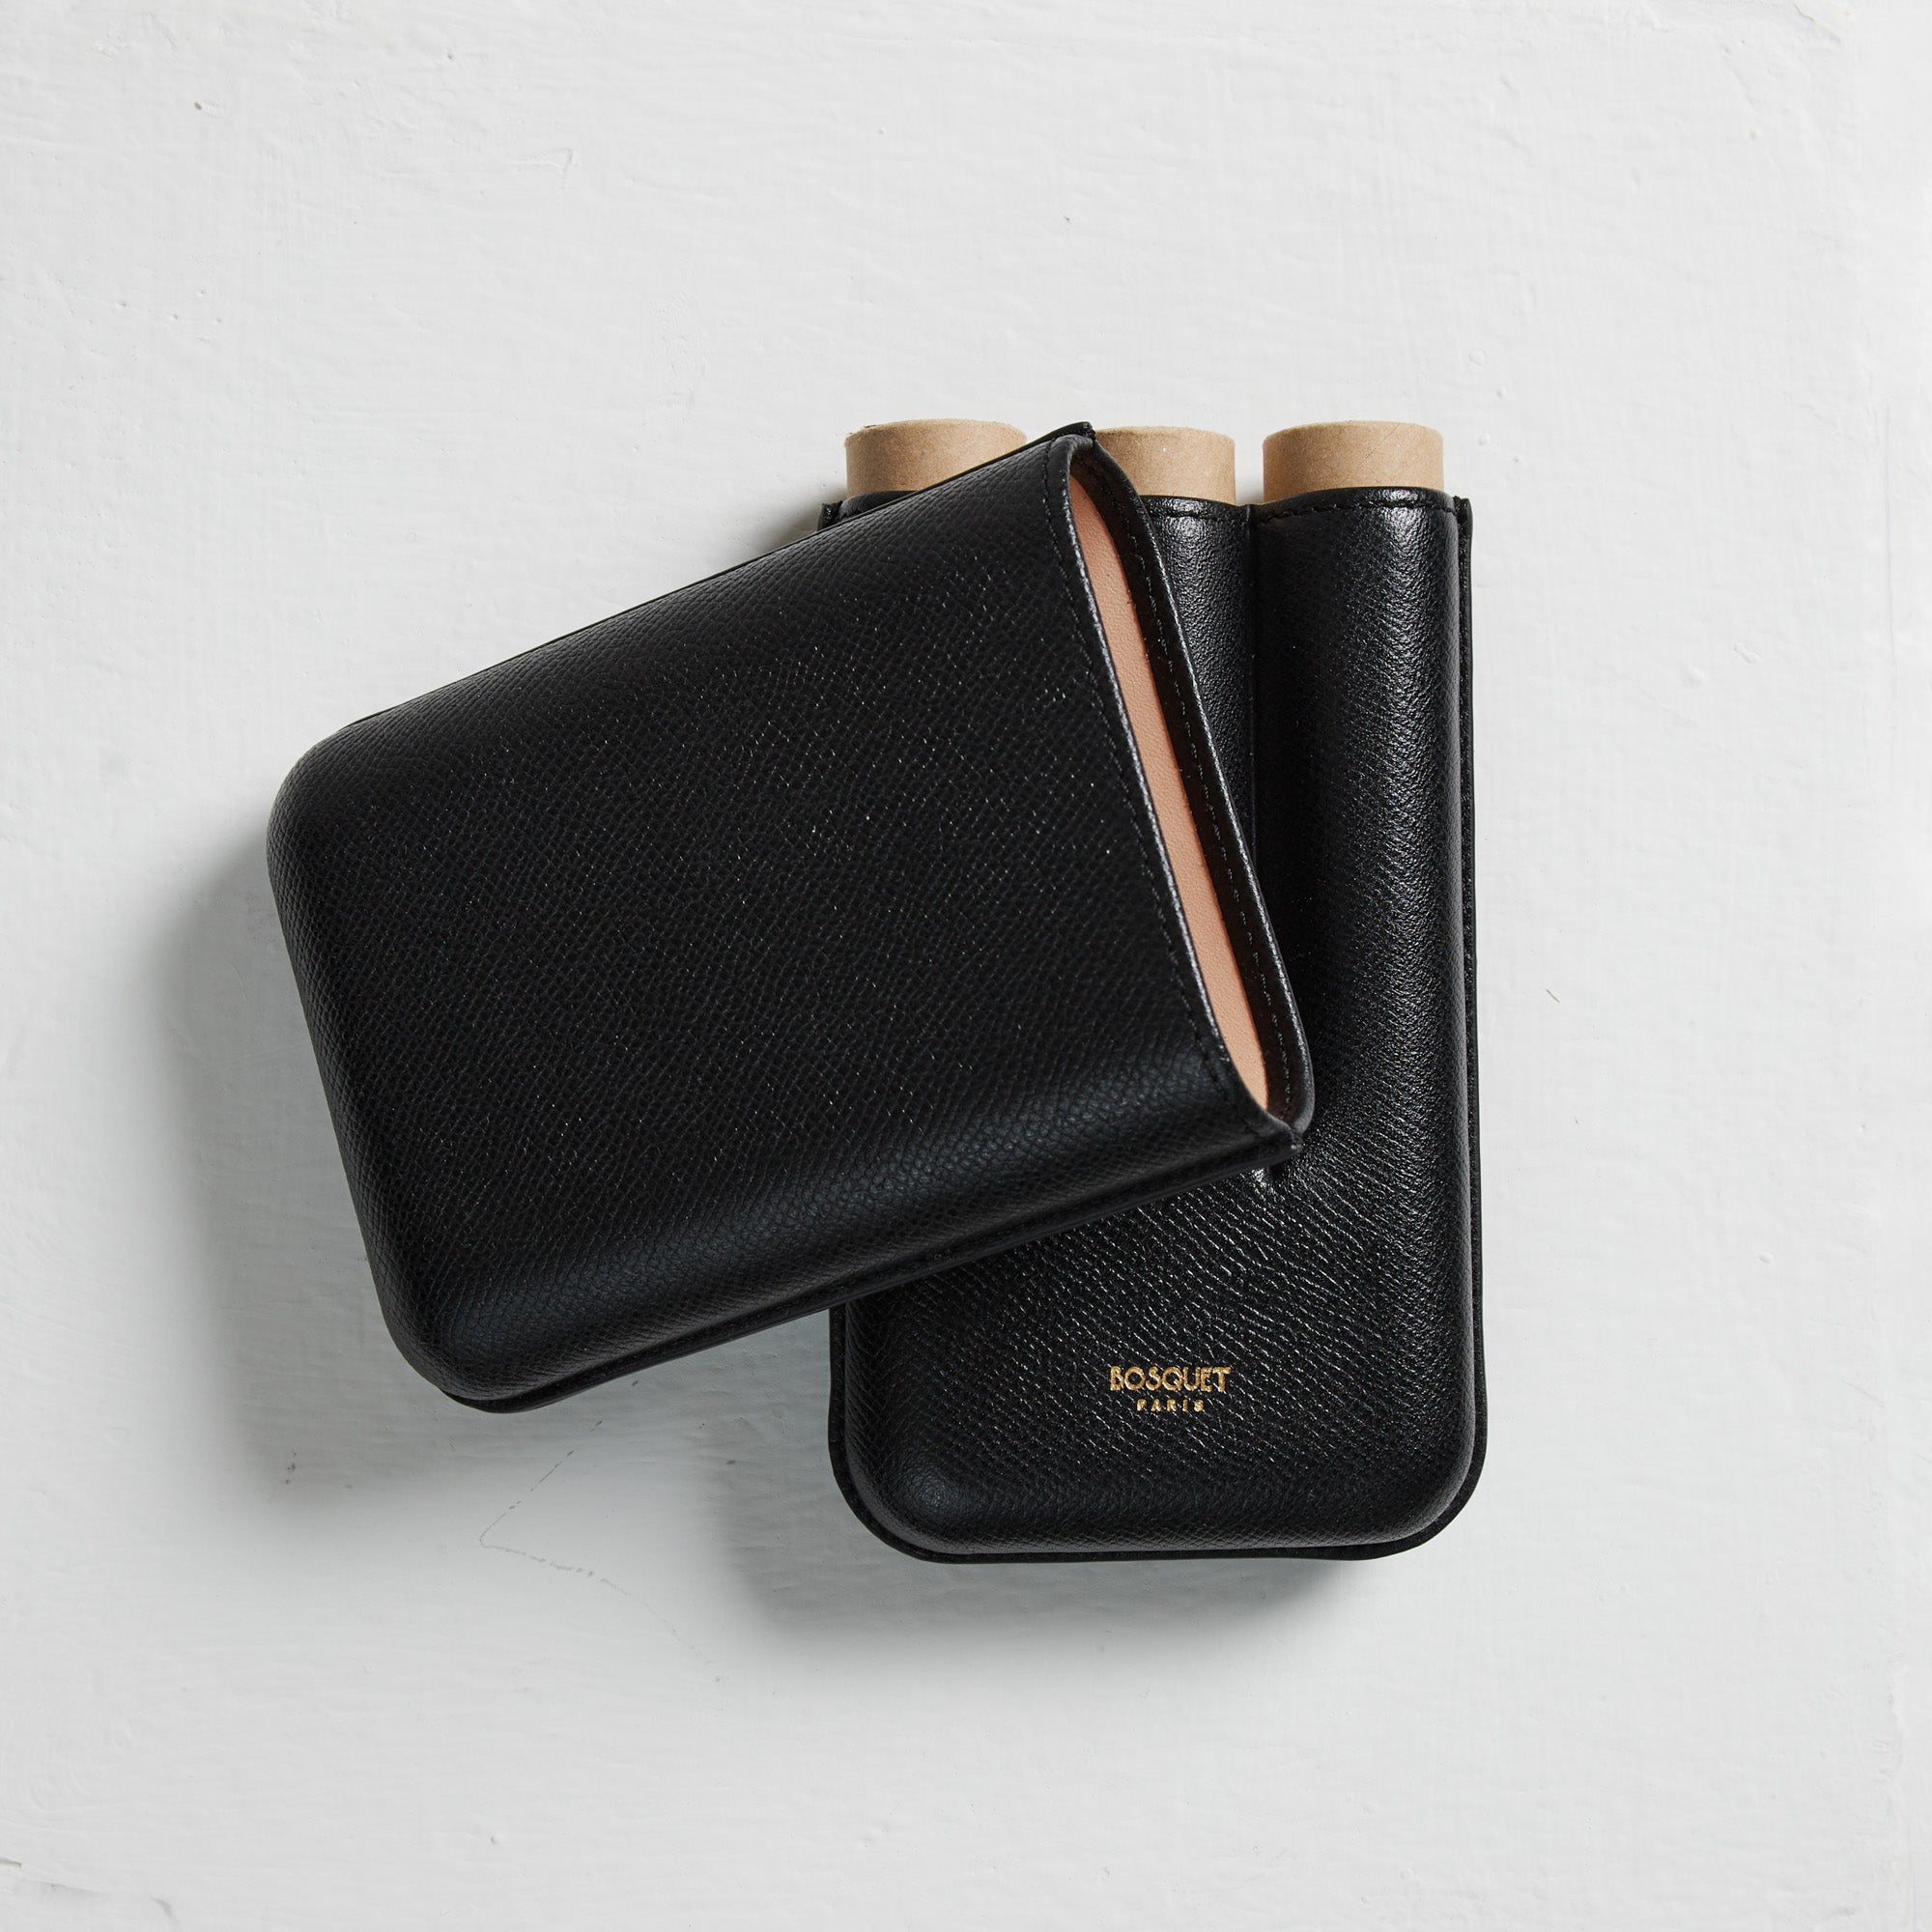 A Bosque Smooth Black Cylindrical Leather Cigar Case made with French leathers and a black cover.